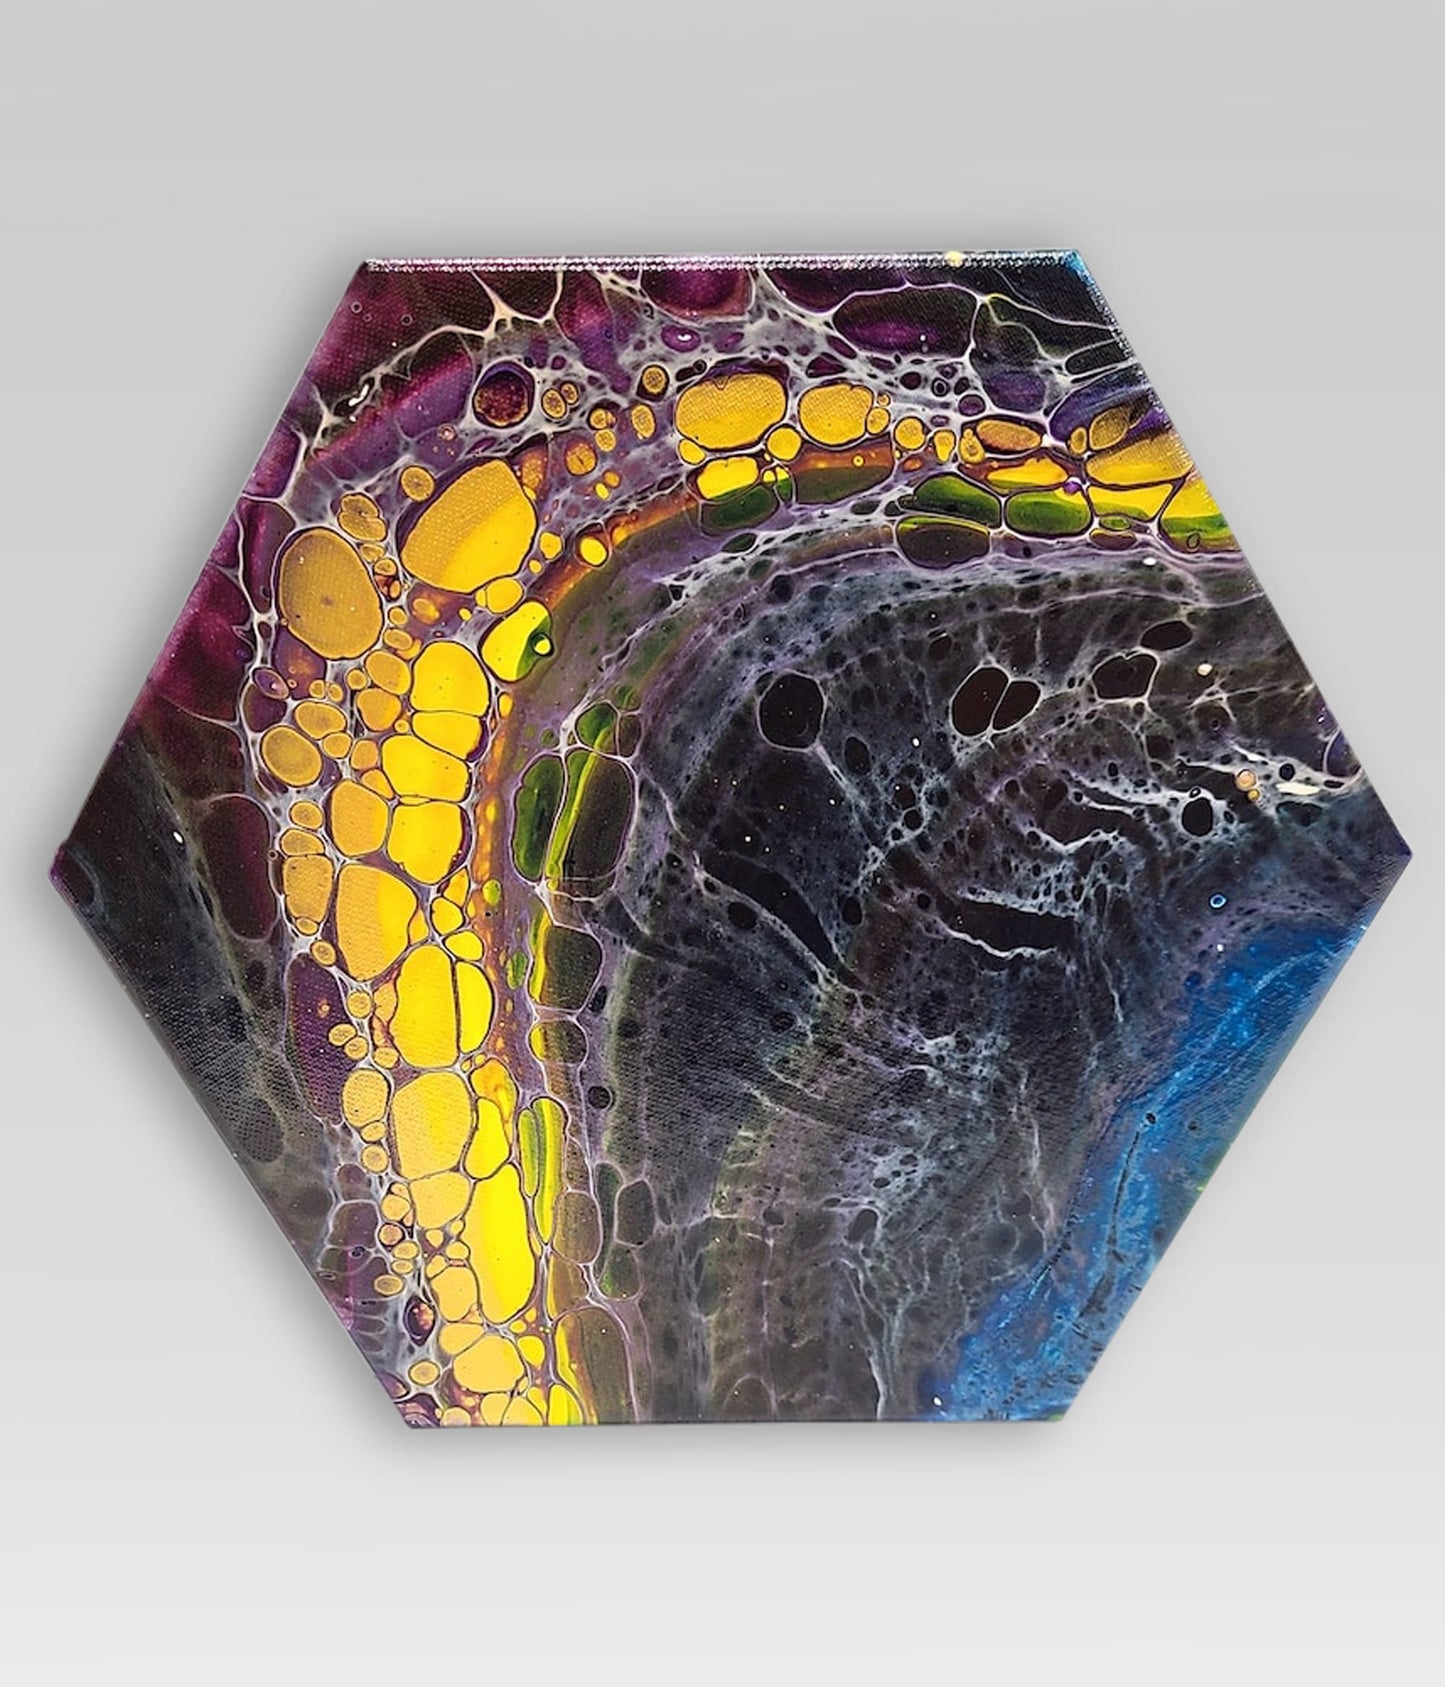 Tiger Eye – 10 x 12 Acrylic Pour Painting On Hexagon Canvas